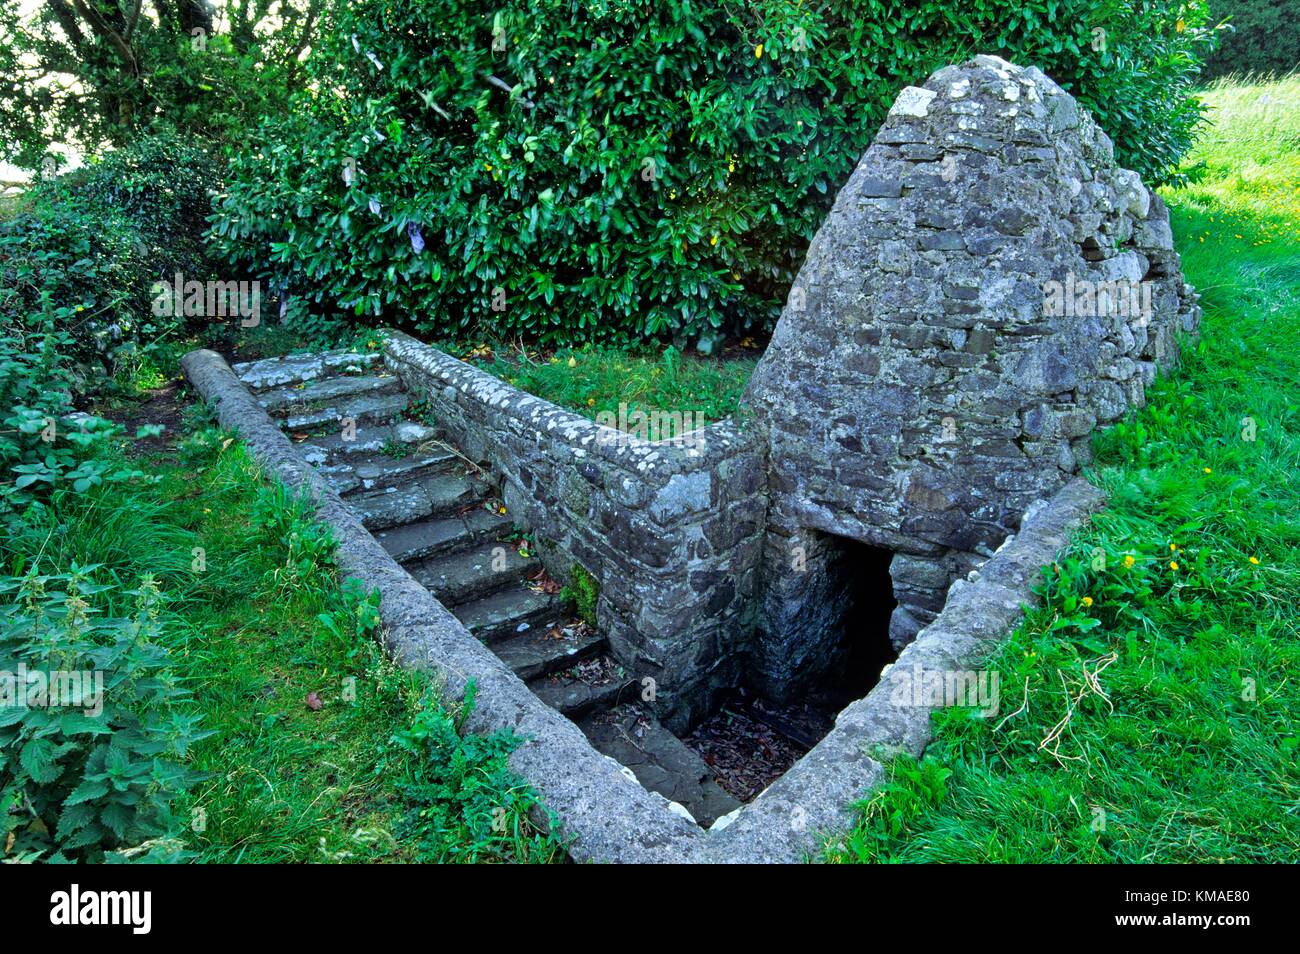 St. Brigid's Well with clootie tree behind in the ancient Celtic Christian church site on Faughart Hill, County Louth, Ireland. Stock Photo